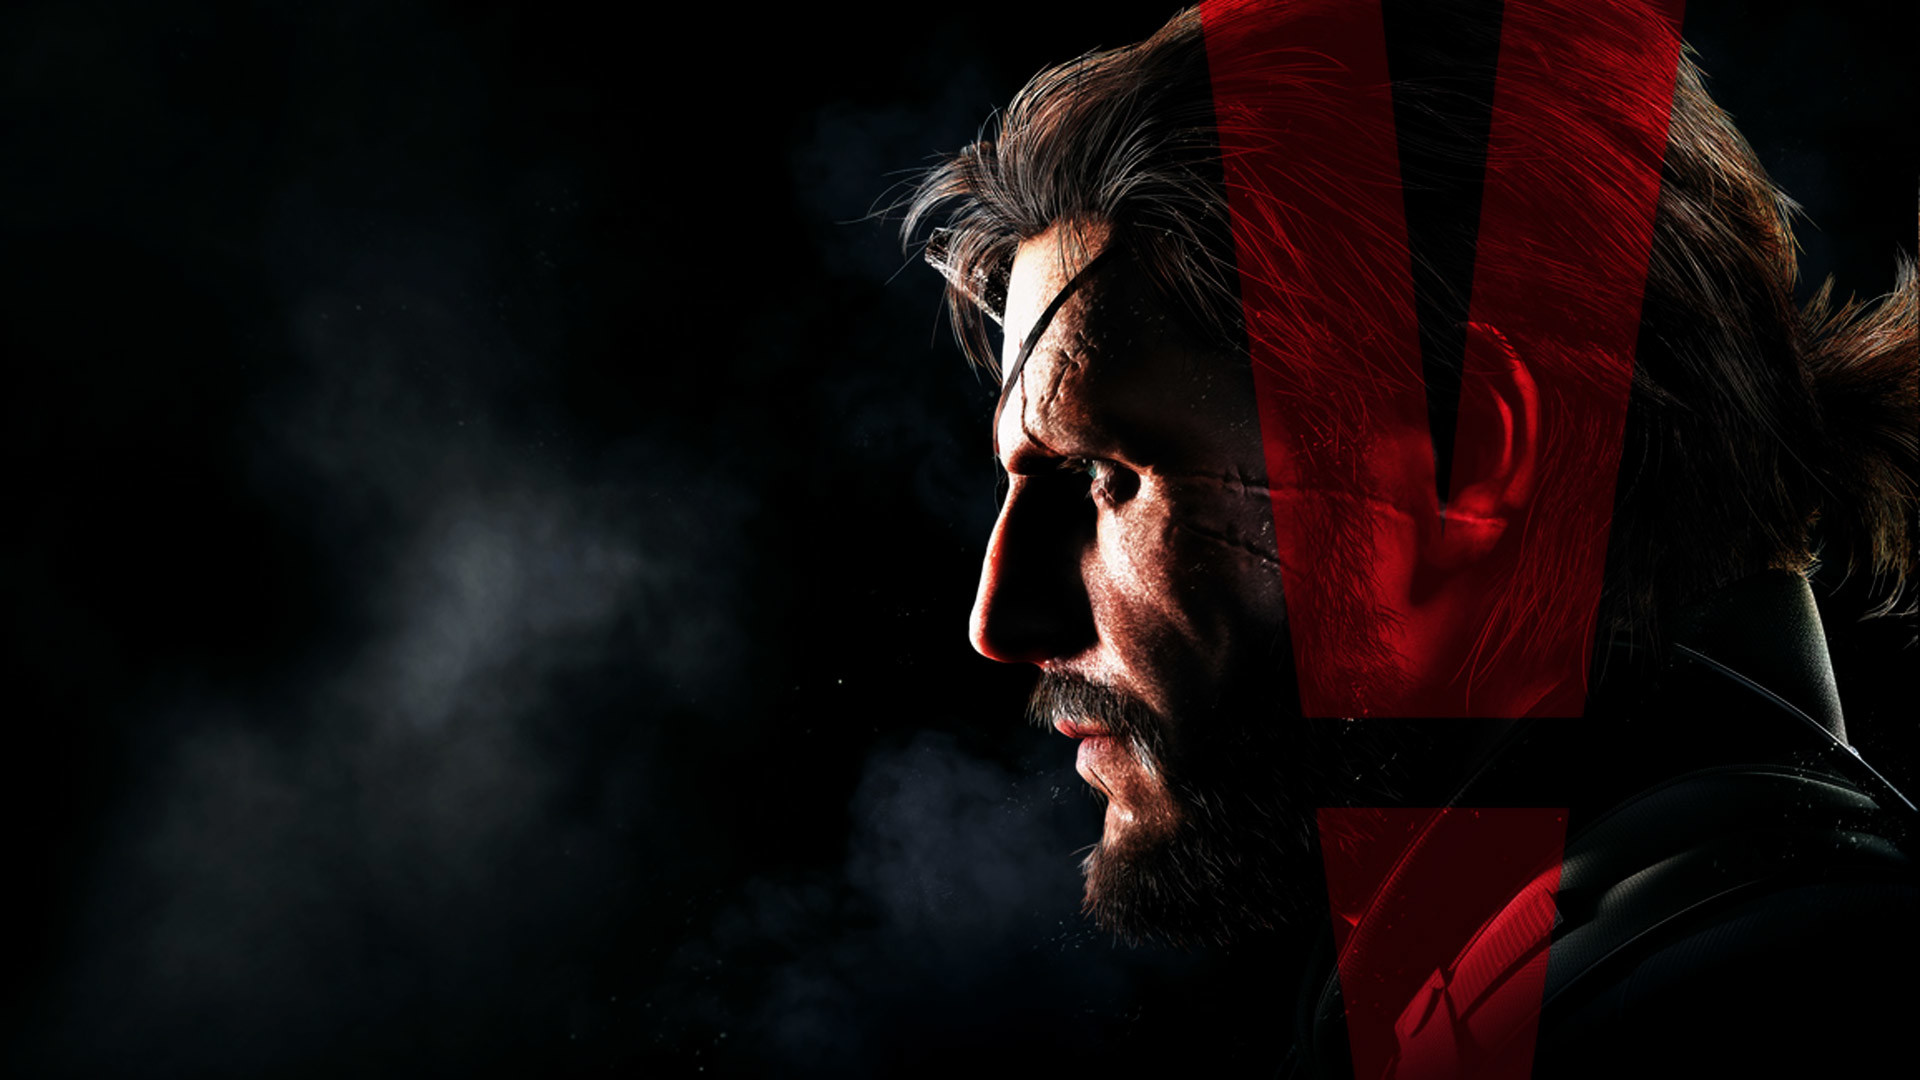 1920x1080 Metal Gear Solid V Wallpaper Exclamation Point Snake